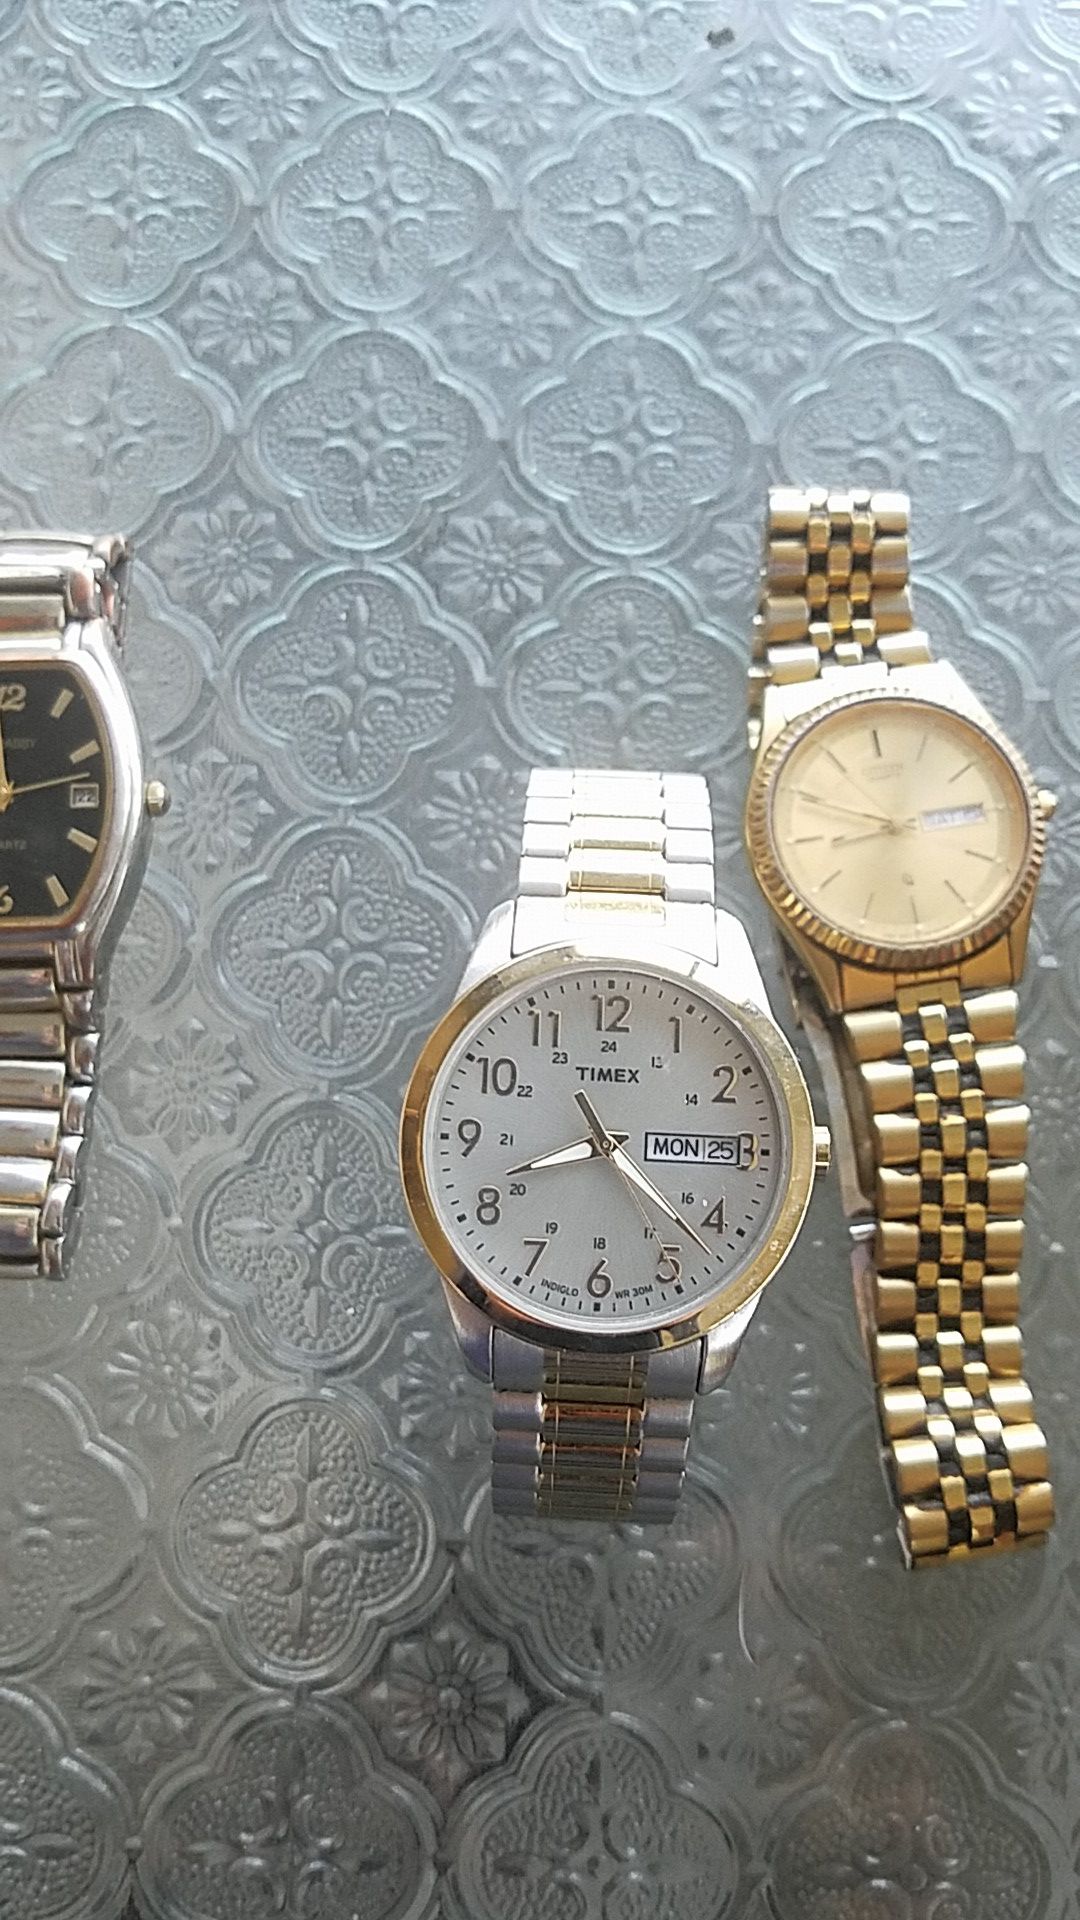 Old watches